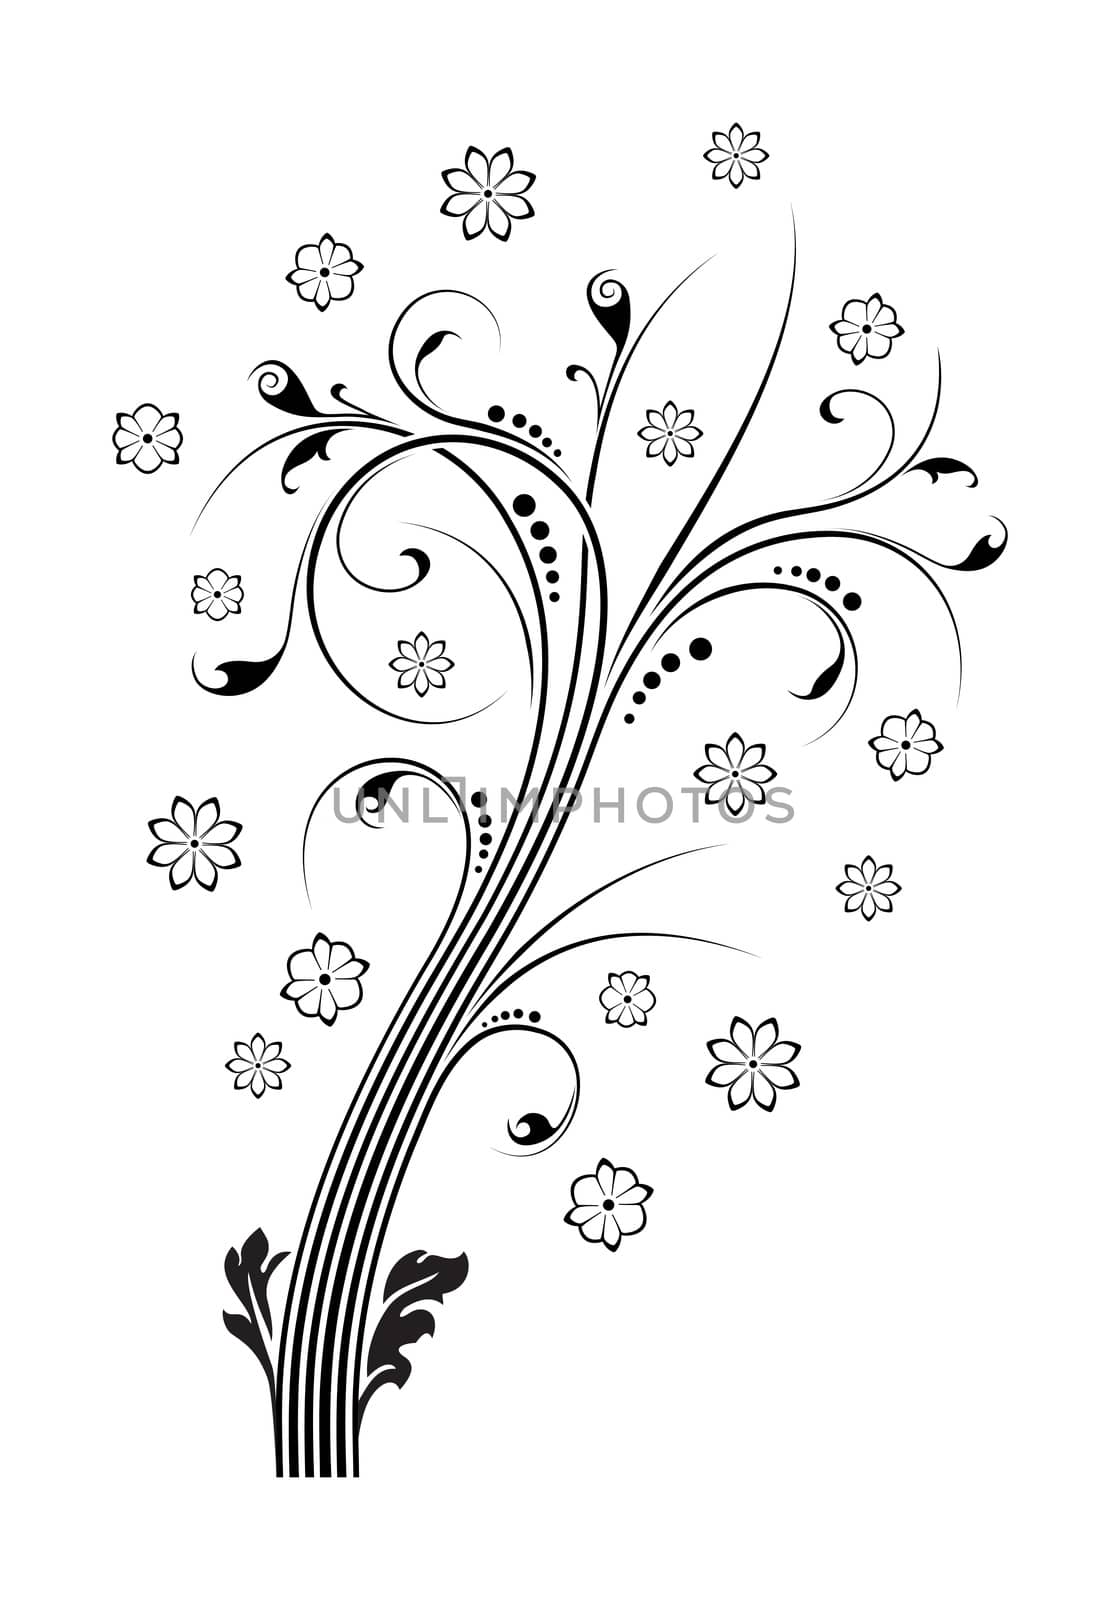 Abstract floral scrolls on white background conceptual artwork